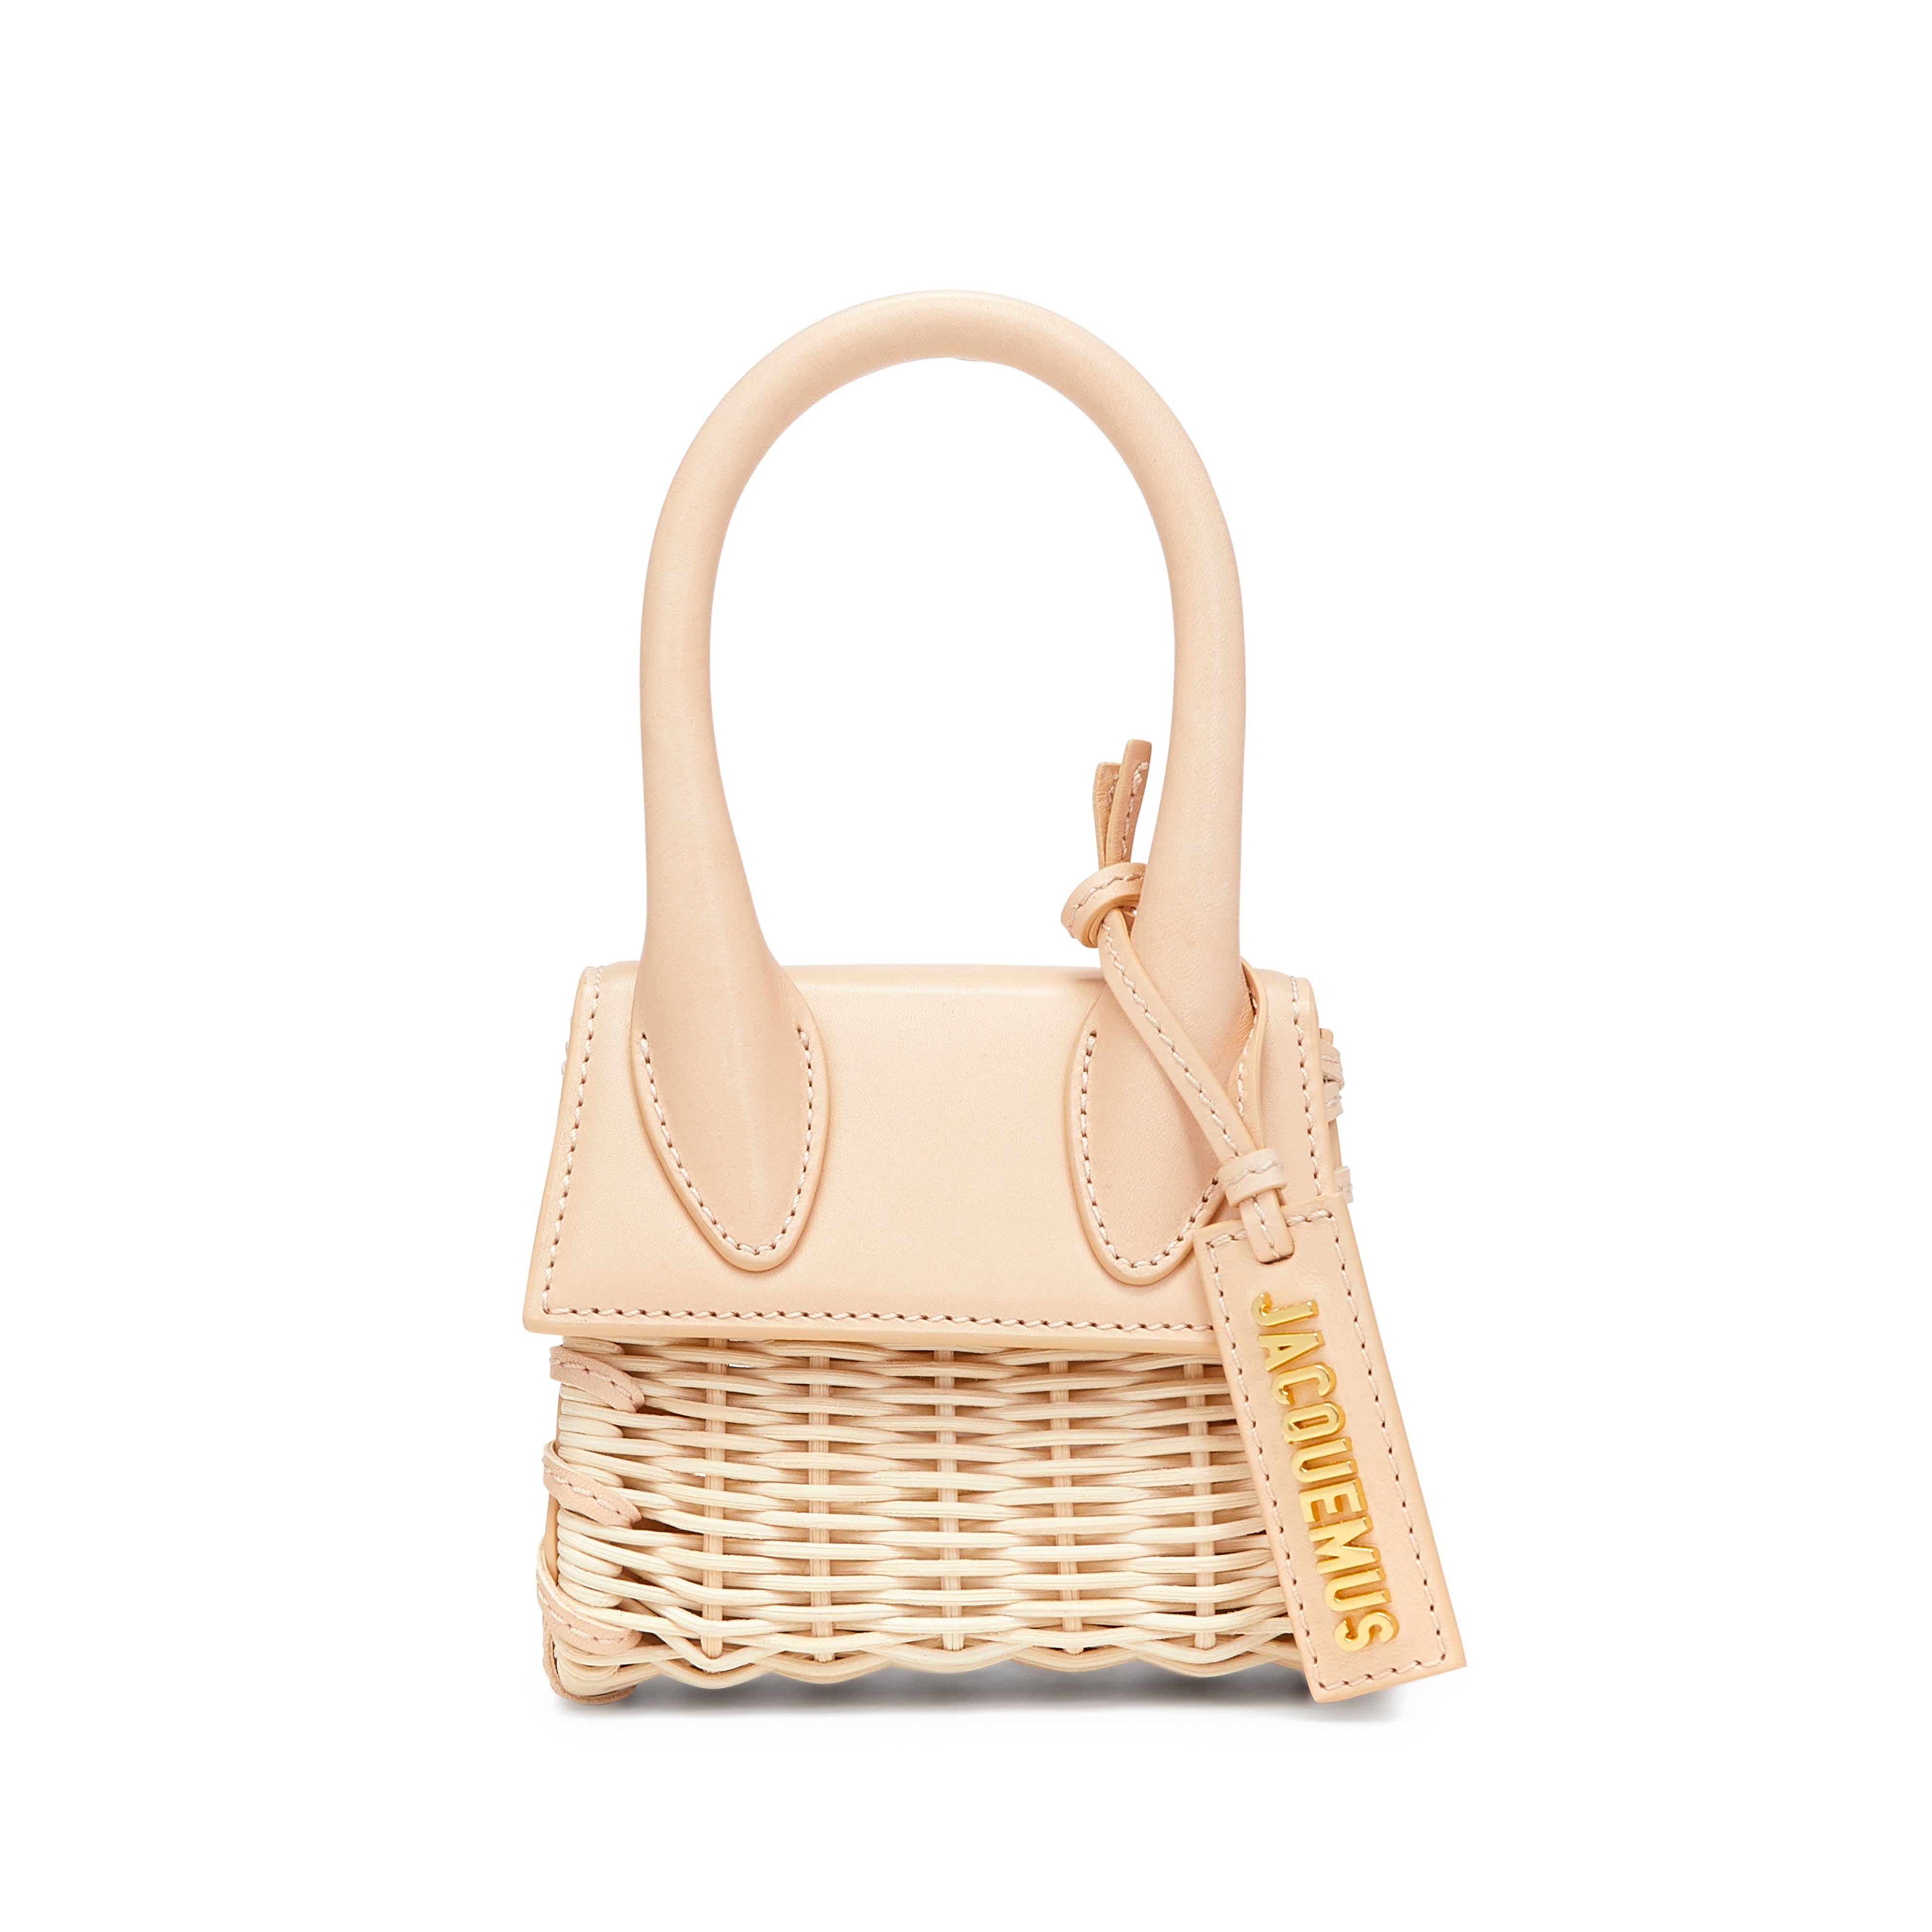 Jacquemus Off White 'Le Chiquito Long' Bag - NOBLEMARS